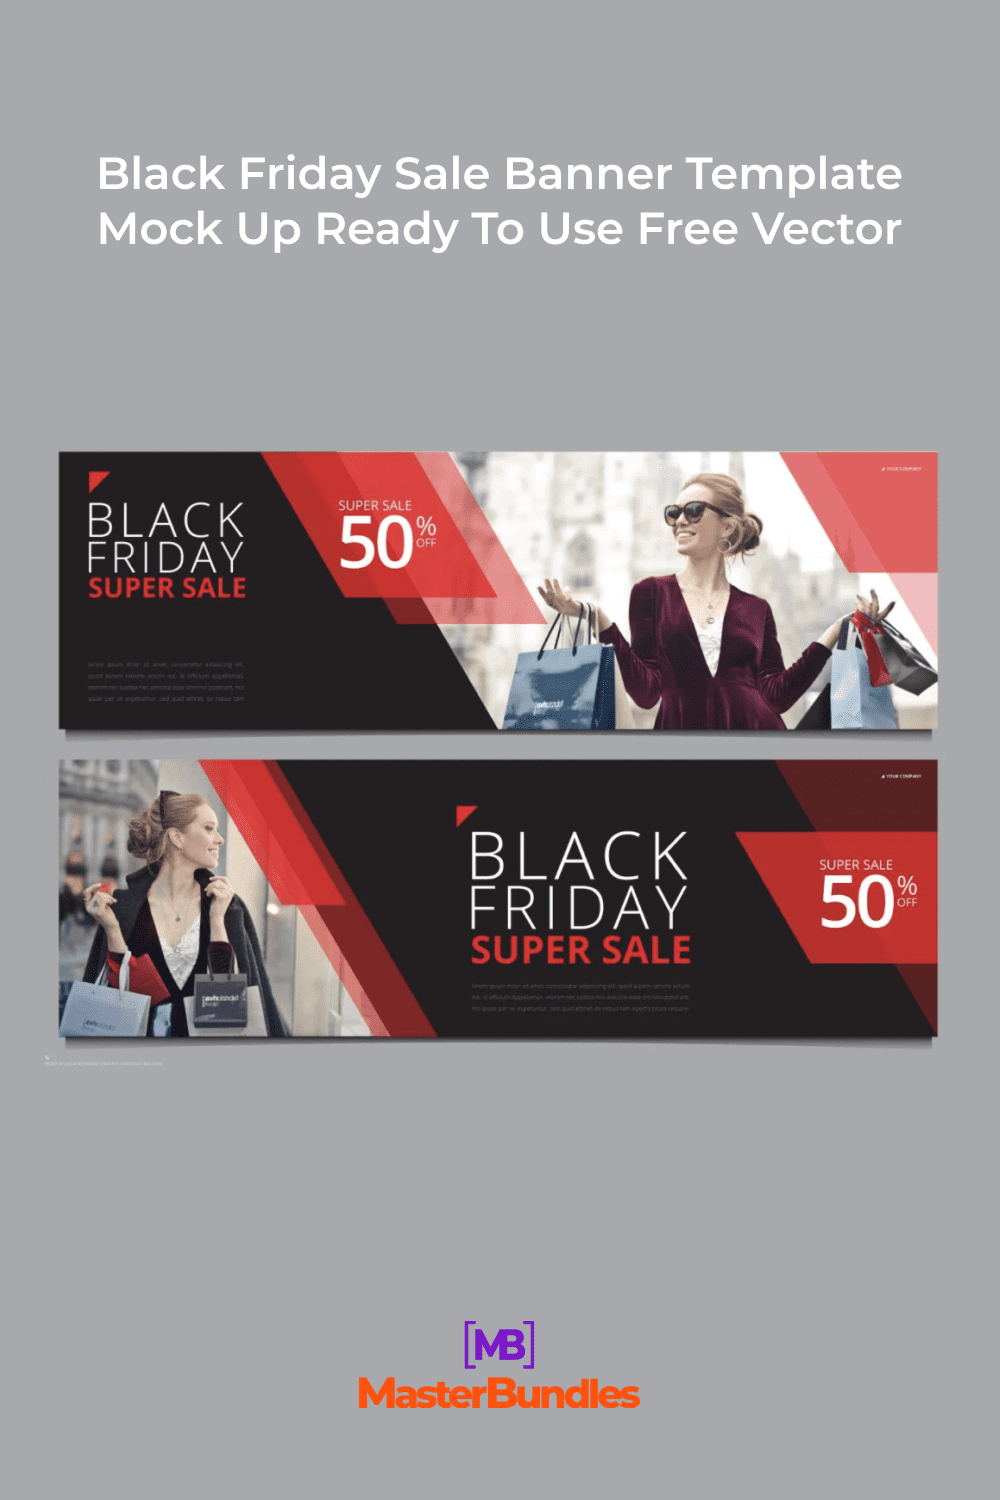 Black Friday Horizontal Banners with a Woman.